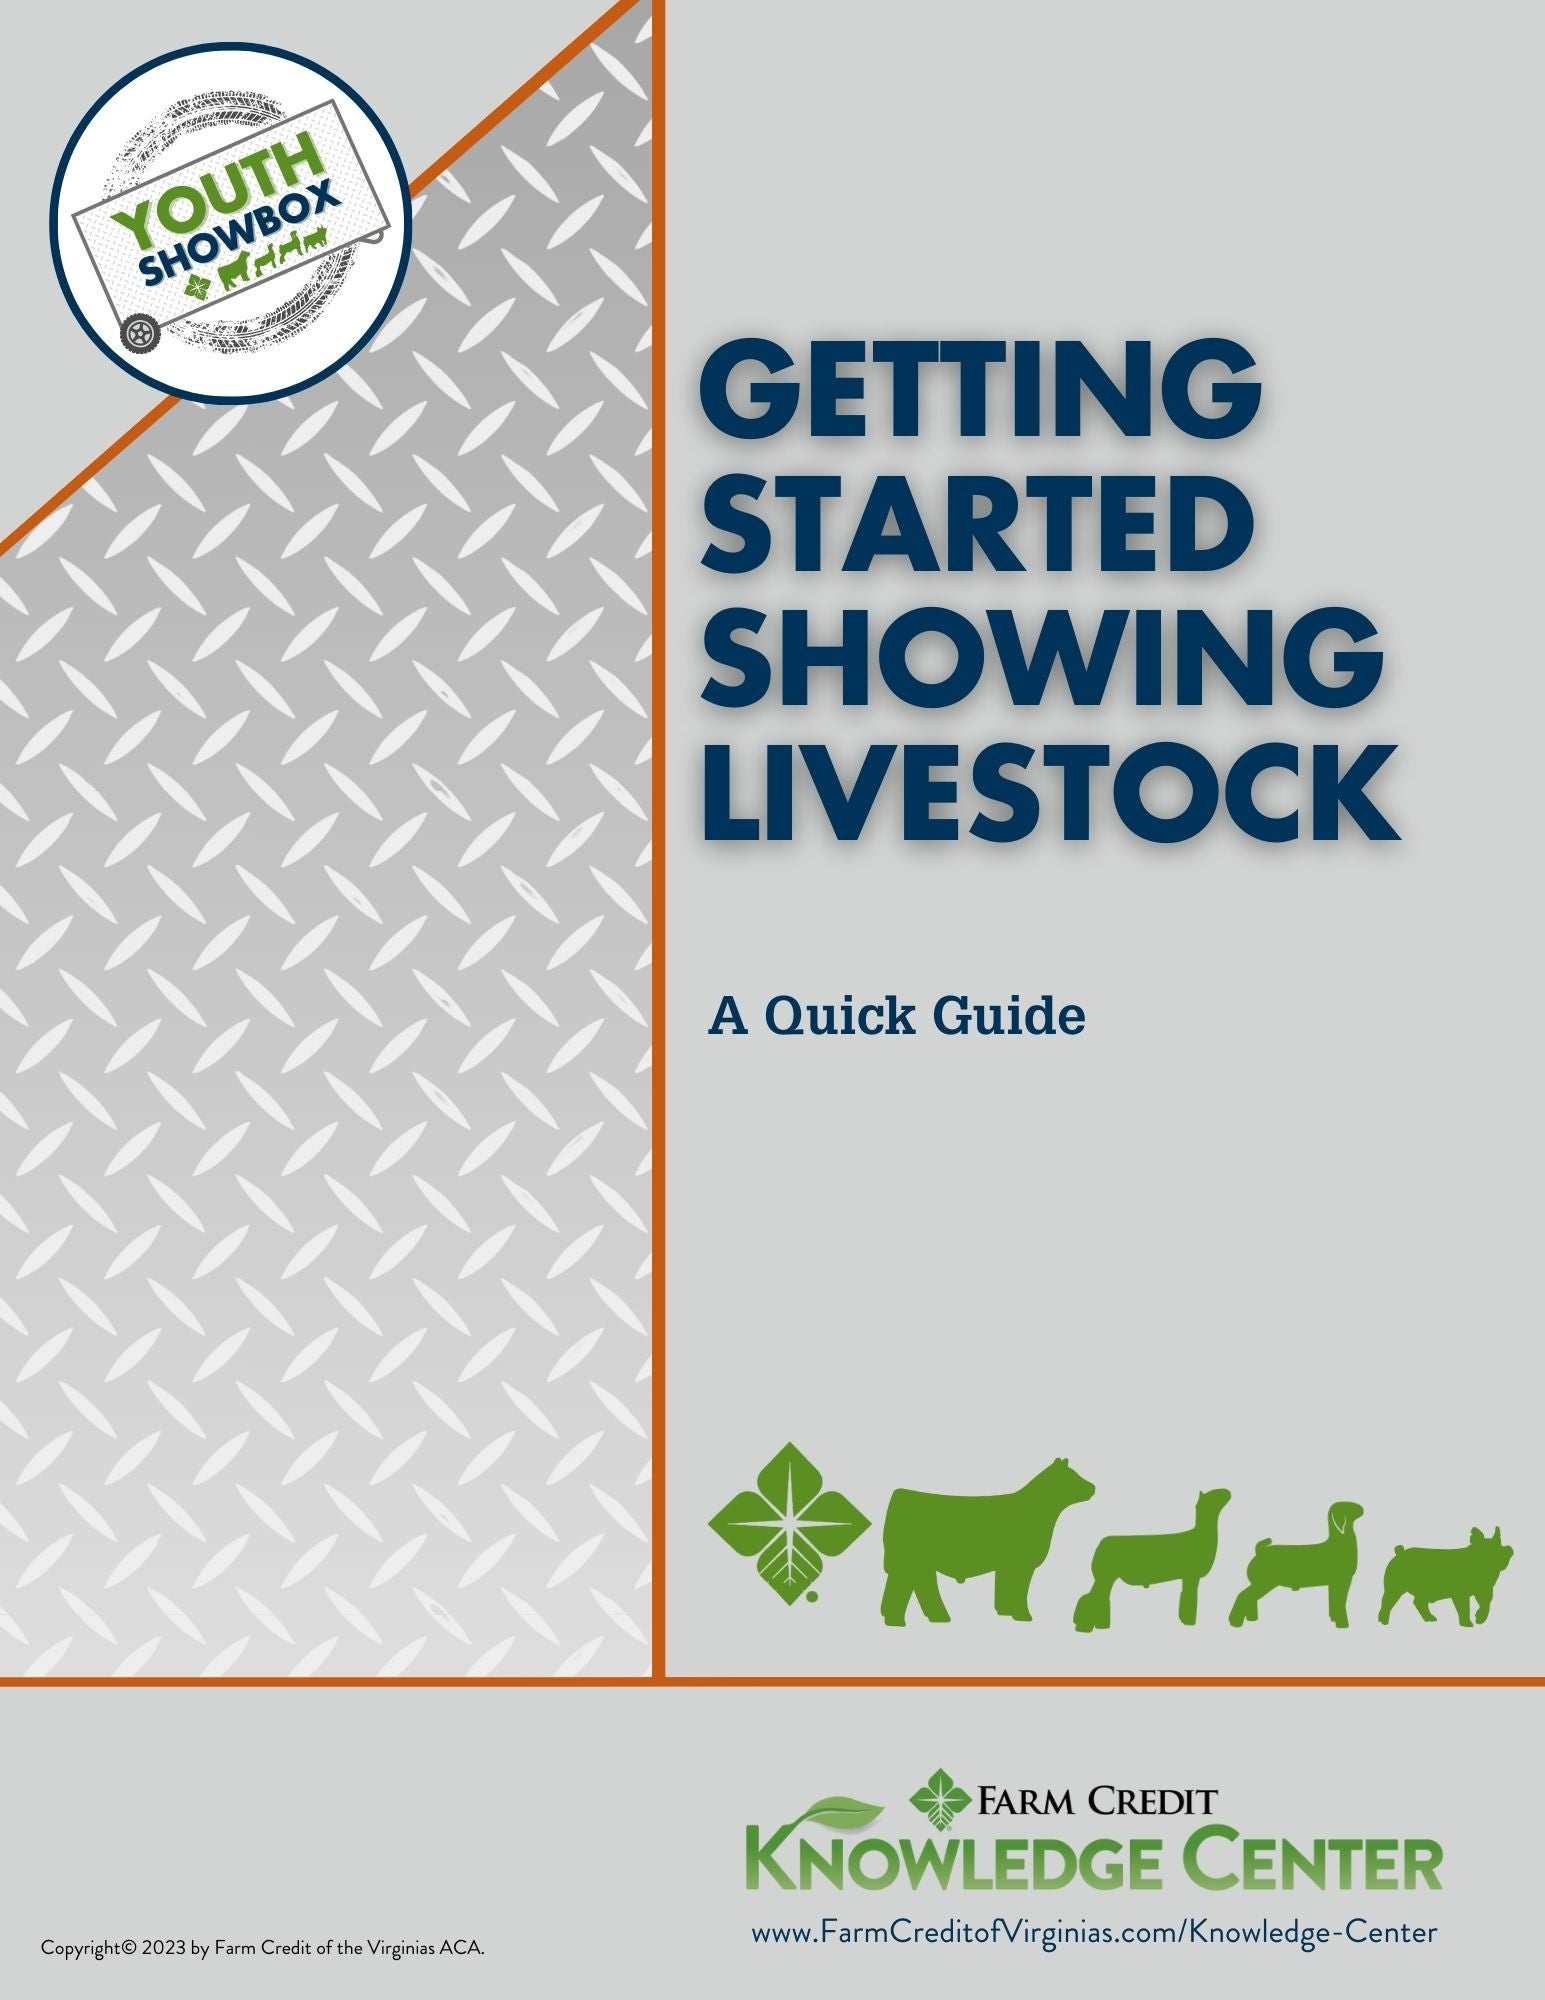 Cover image of Getting Started Showing Livestock Quick Guide